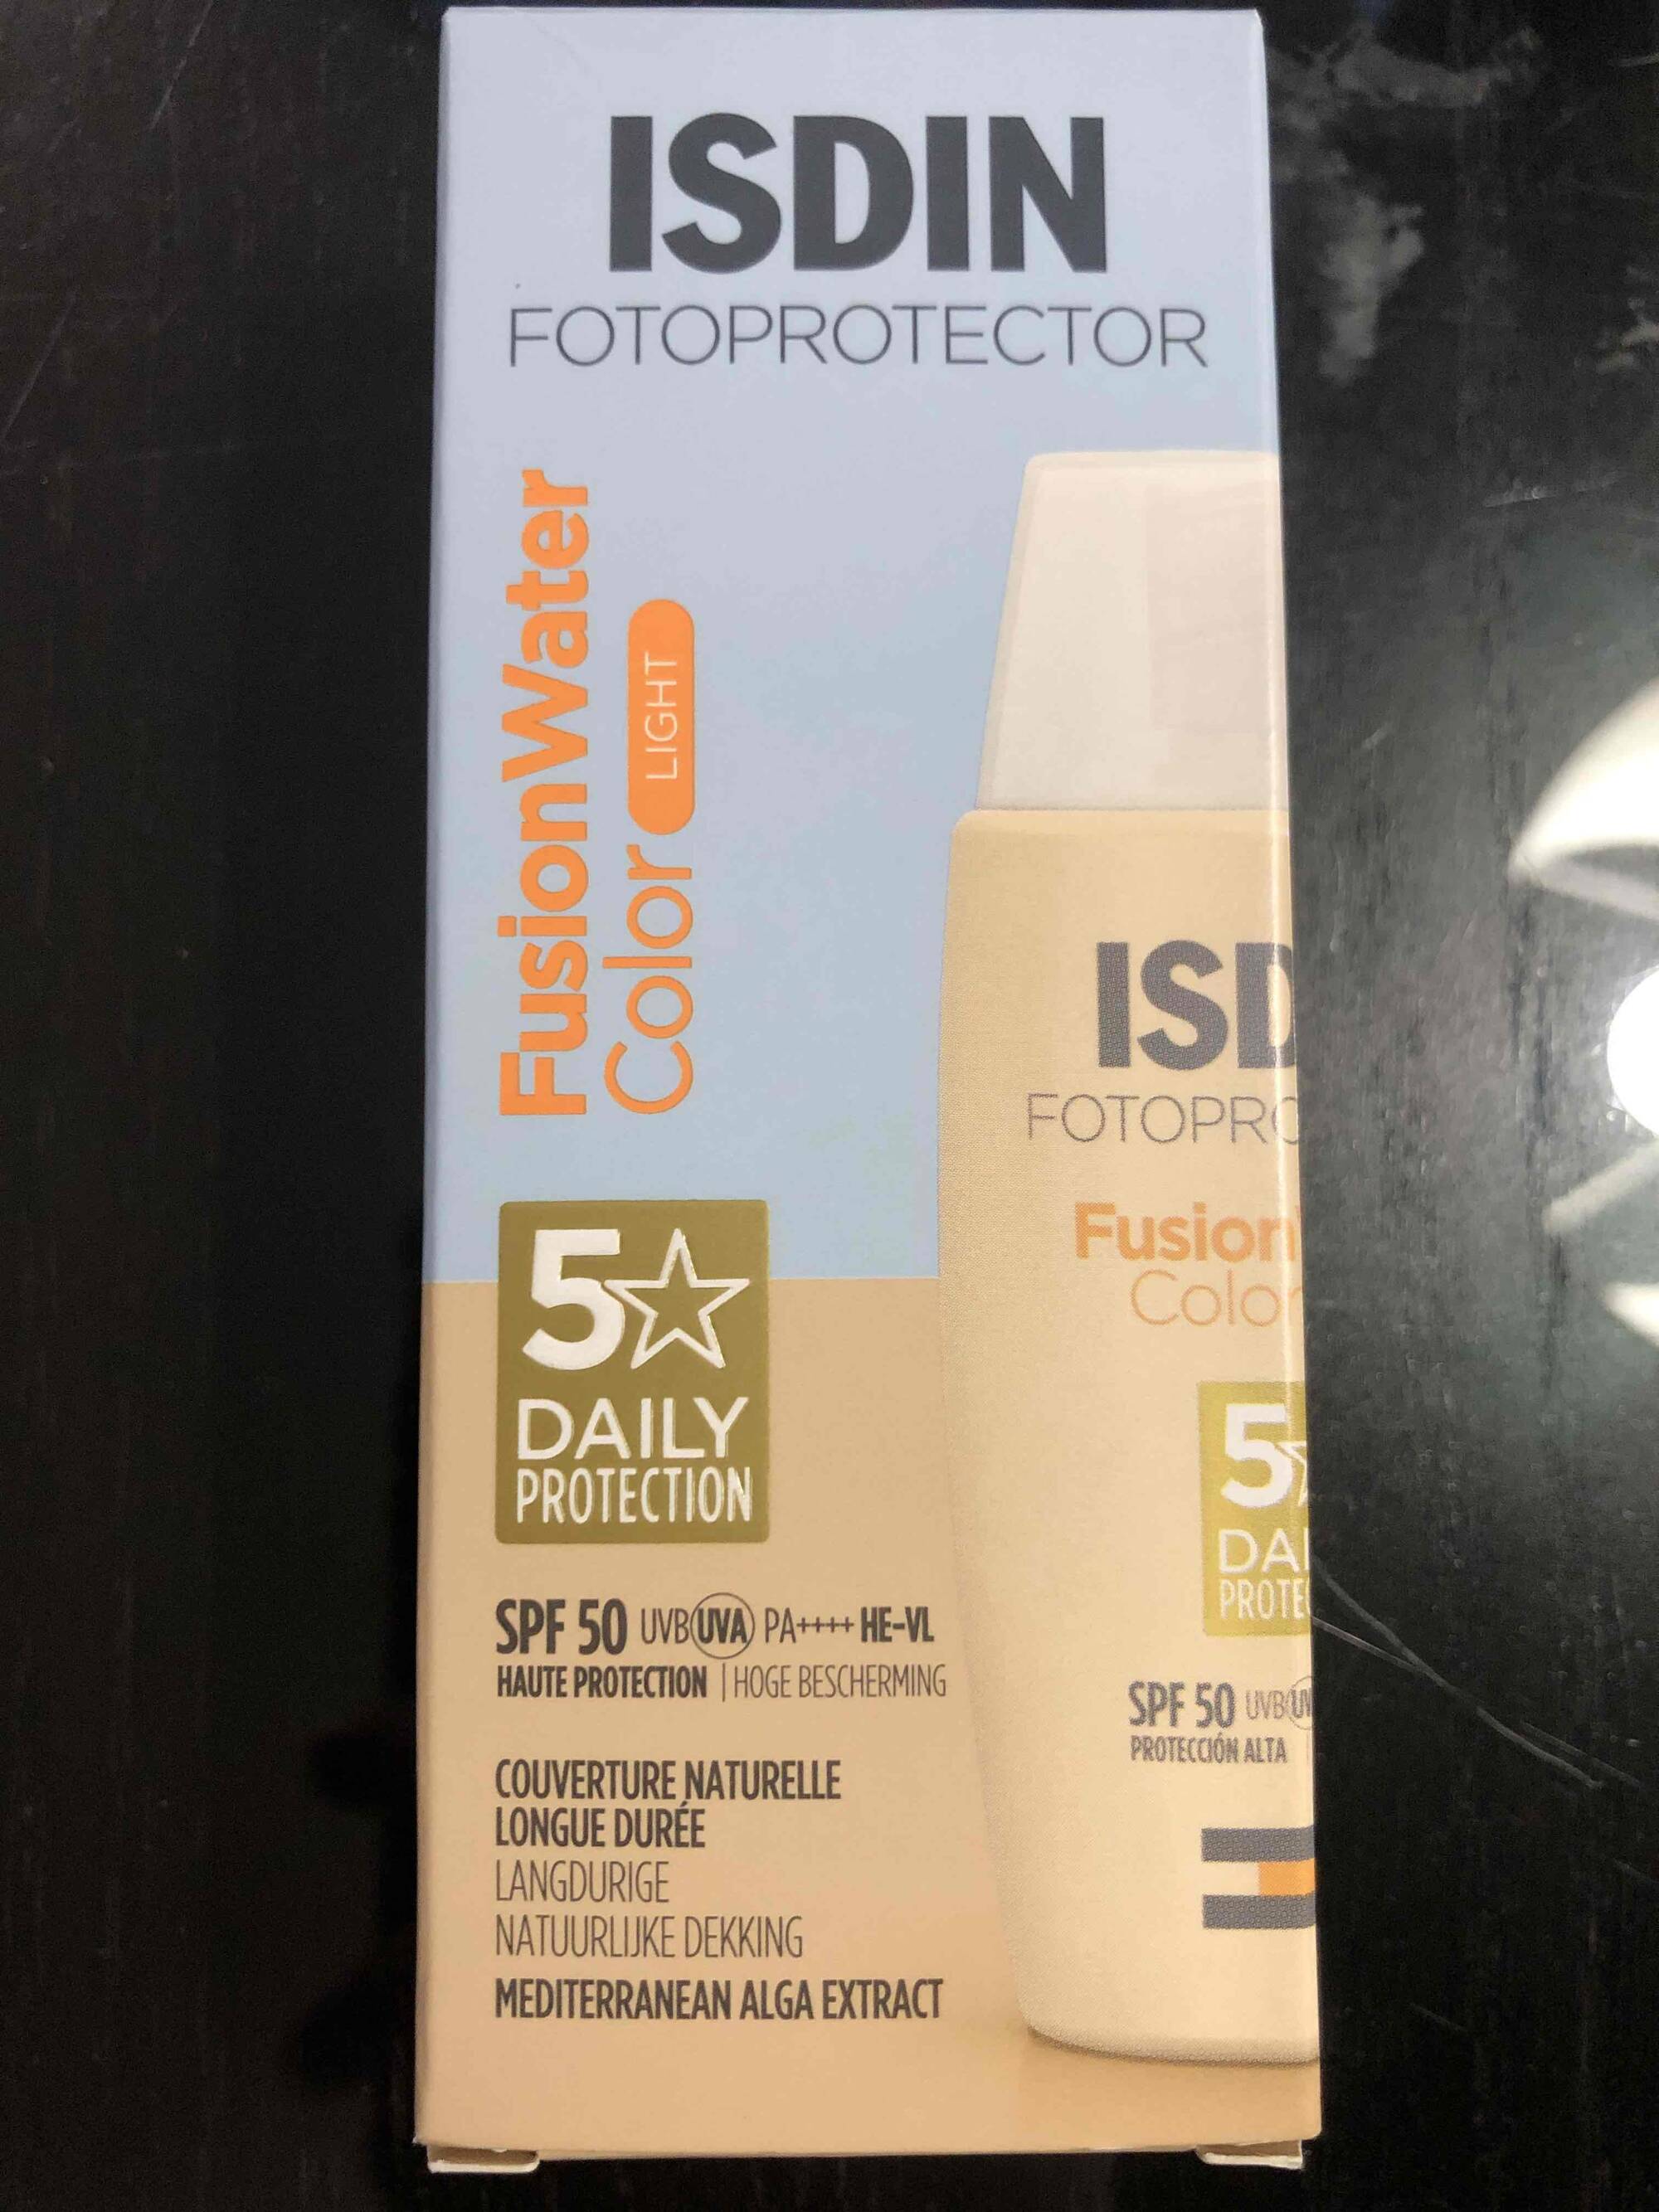 ISDIN - Fotoprotector - Fusion water color light SPF 50